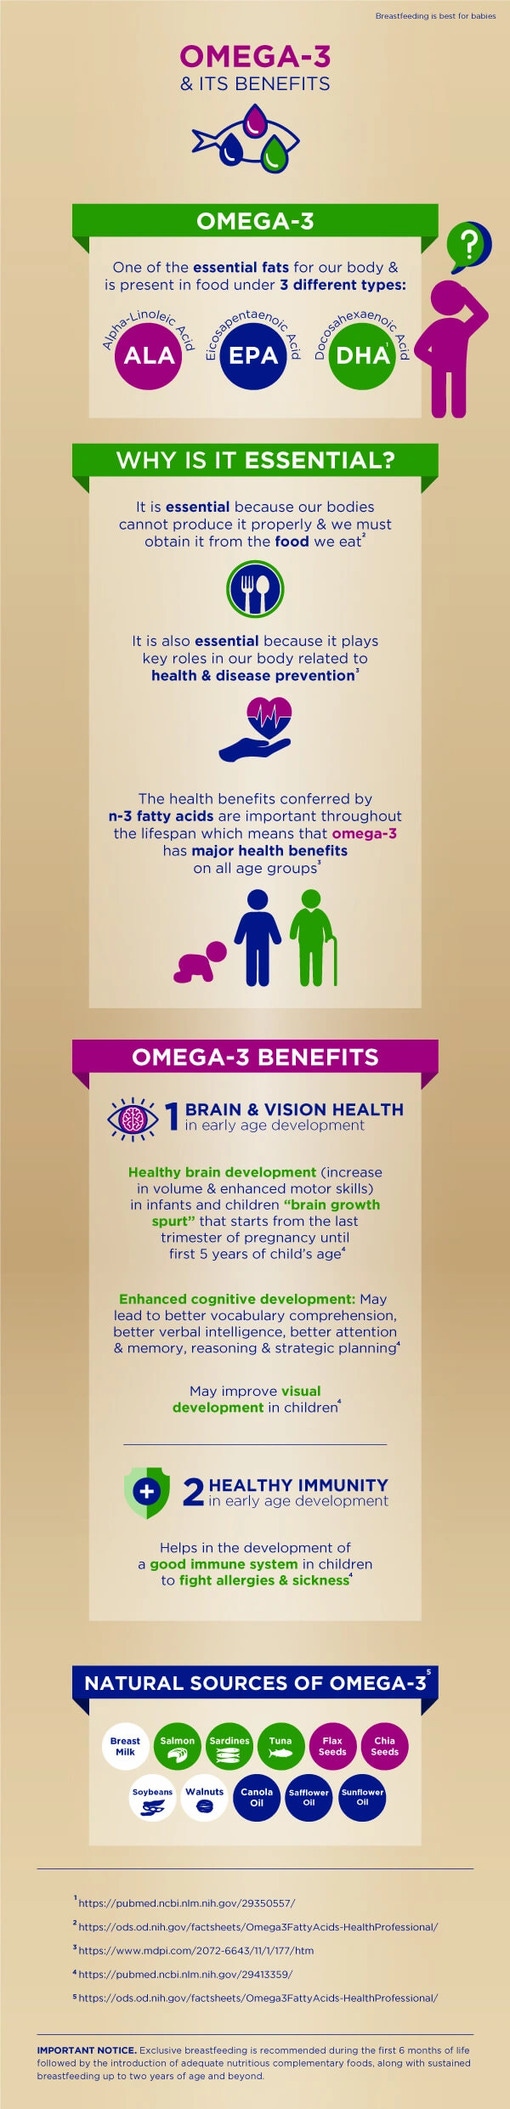 Omega 3 and Its Benefits